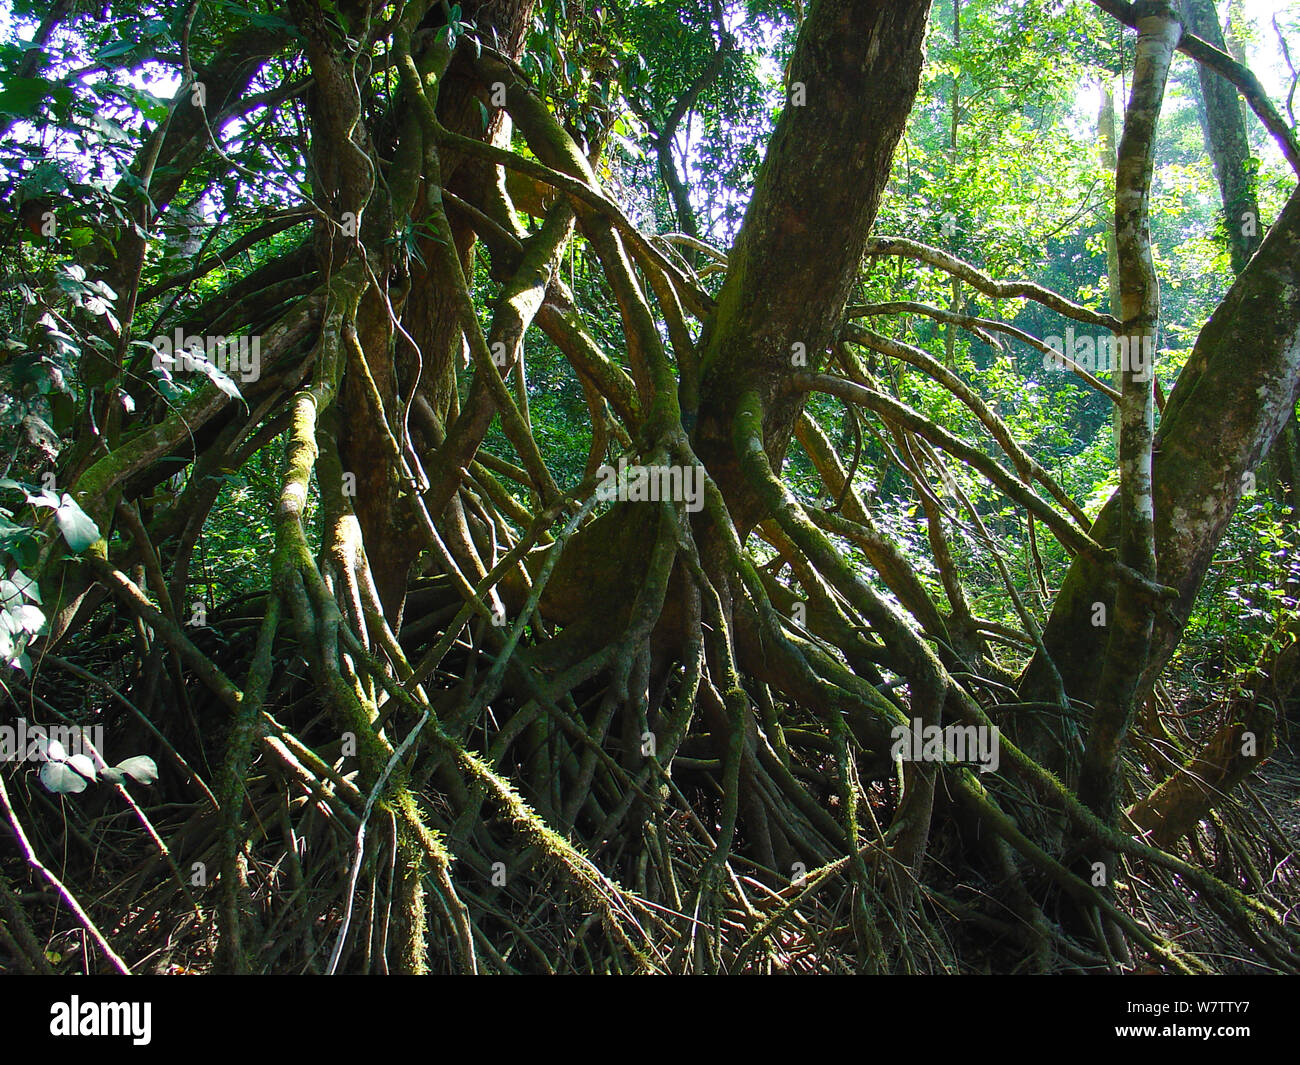 Stilted root system of Uapaca heudelotii on the Mambili River. Stilted root system allows the tree to maintain a firm grip in seasonally flooded locations. Odzala-Kokoua National Park, Republic of Congo. Stock Photo